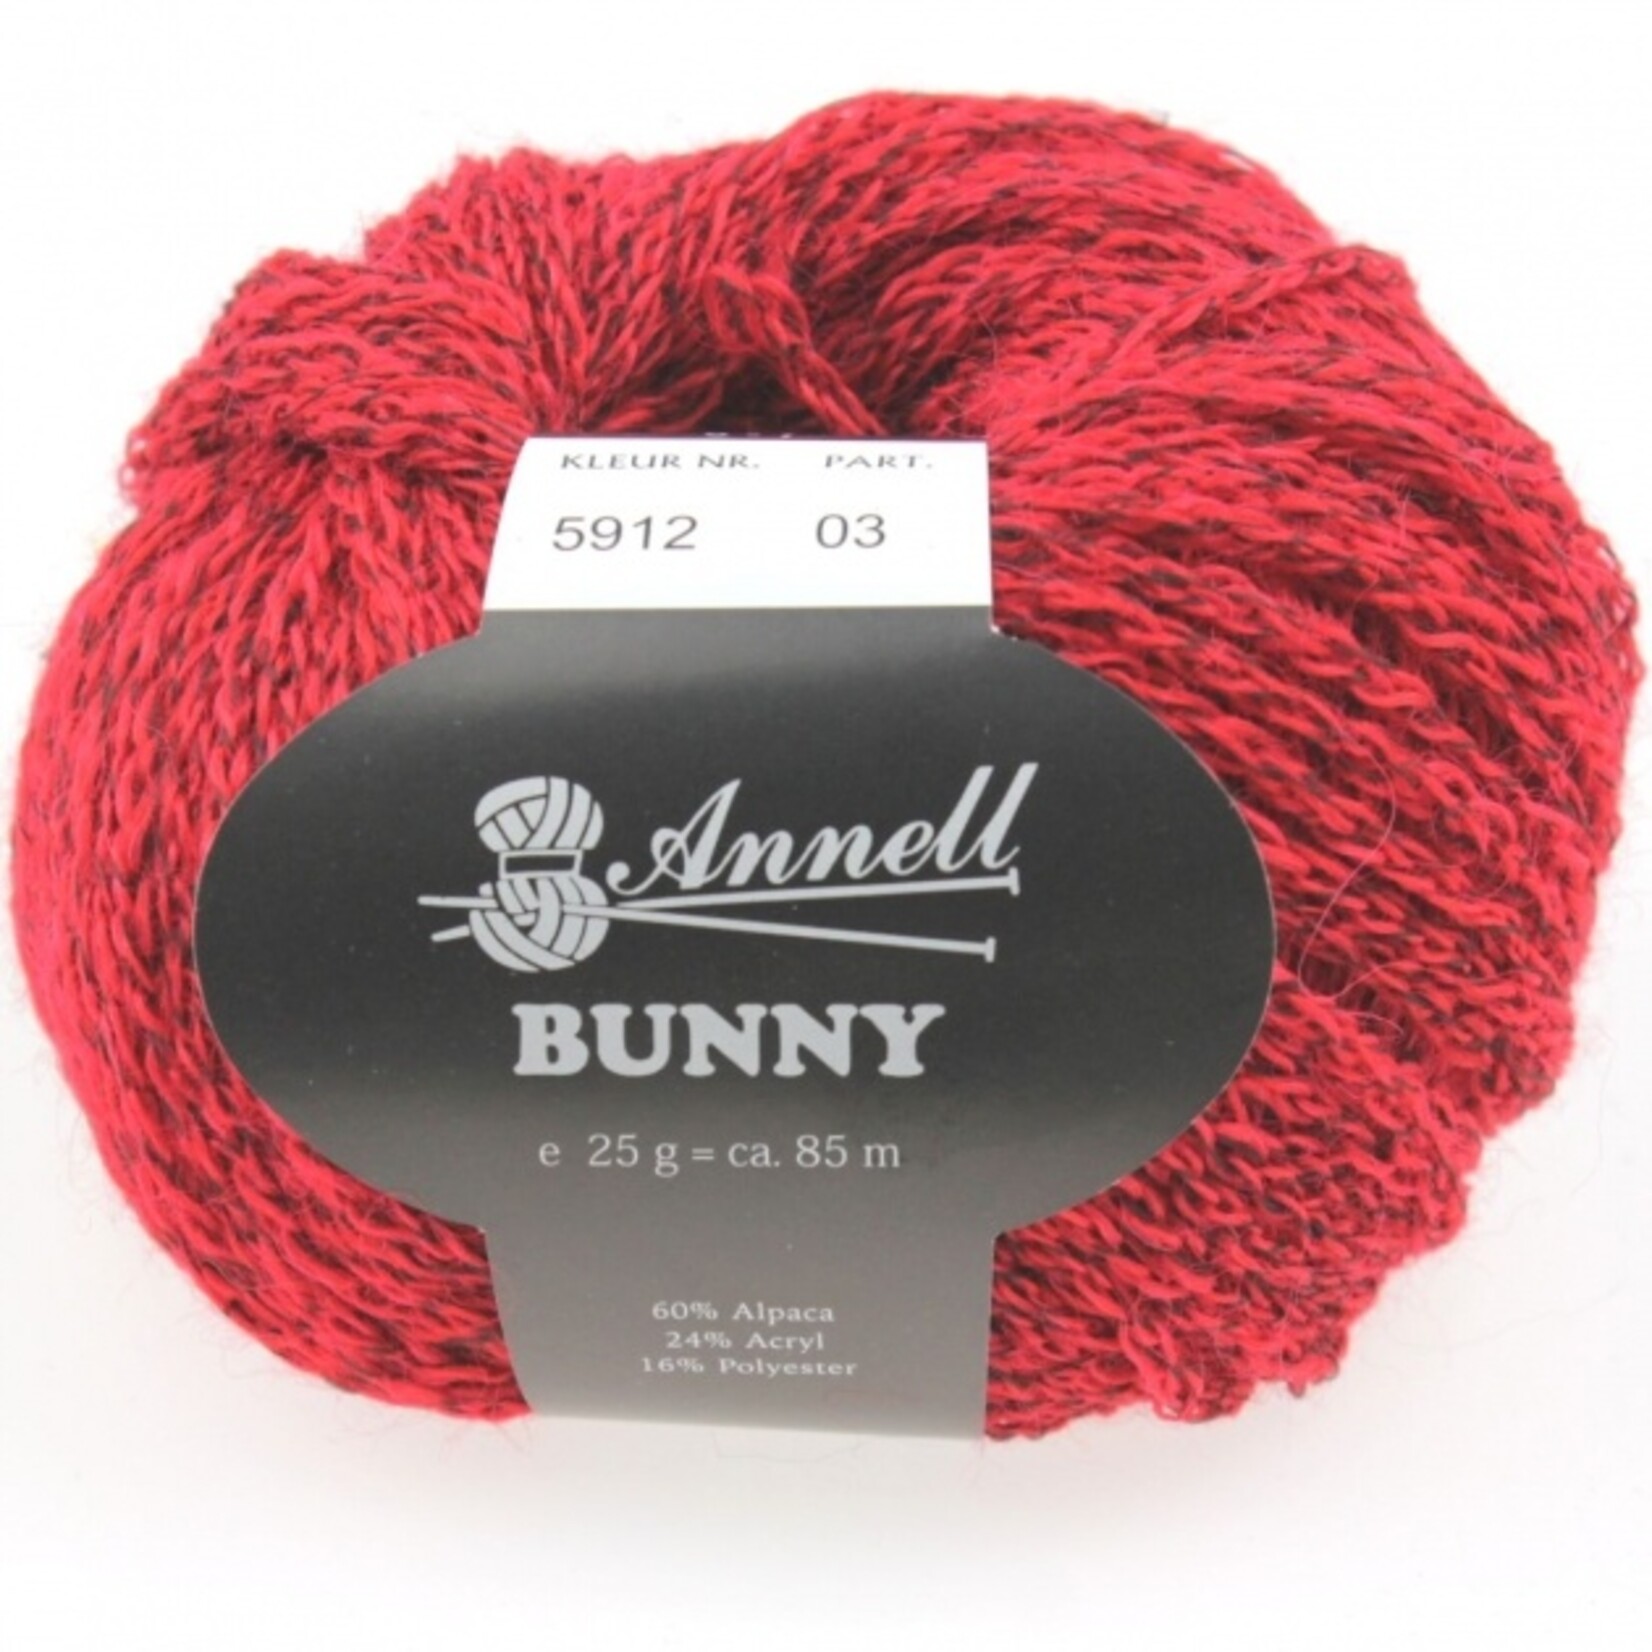 annell bunny 5912